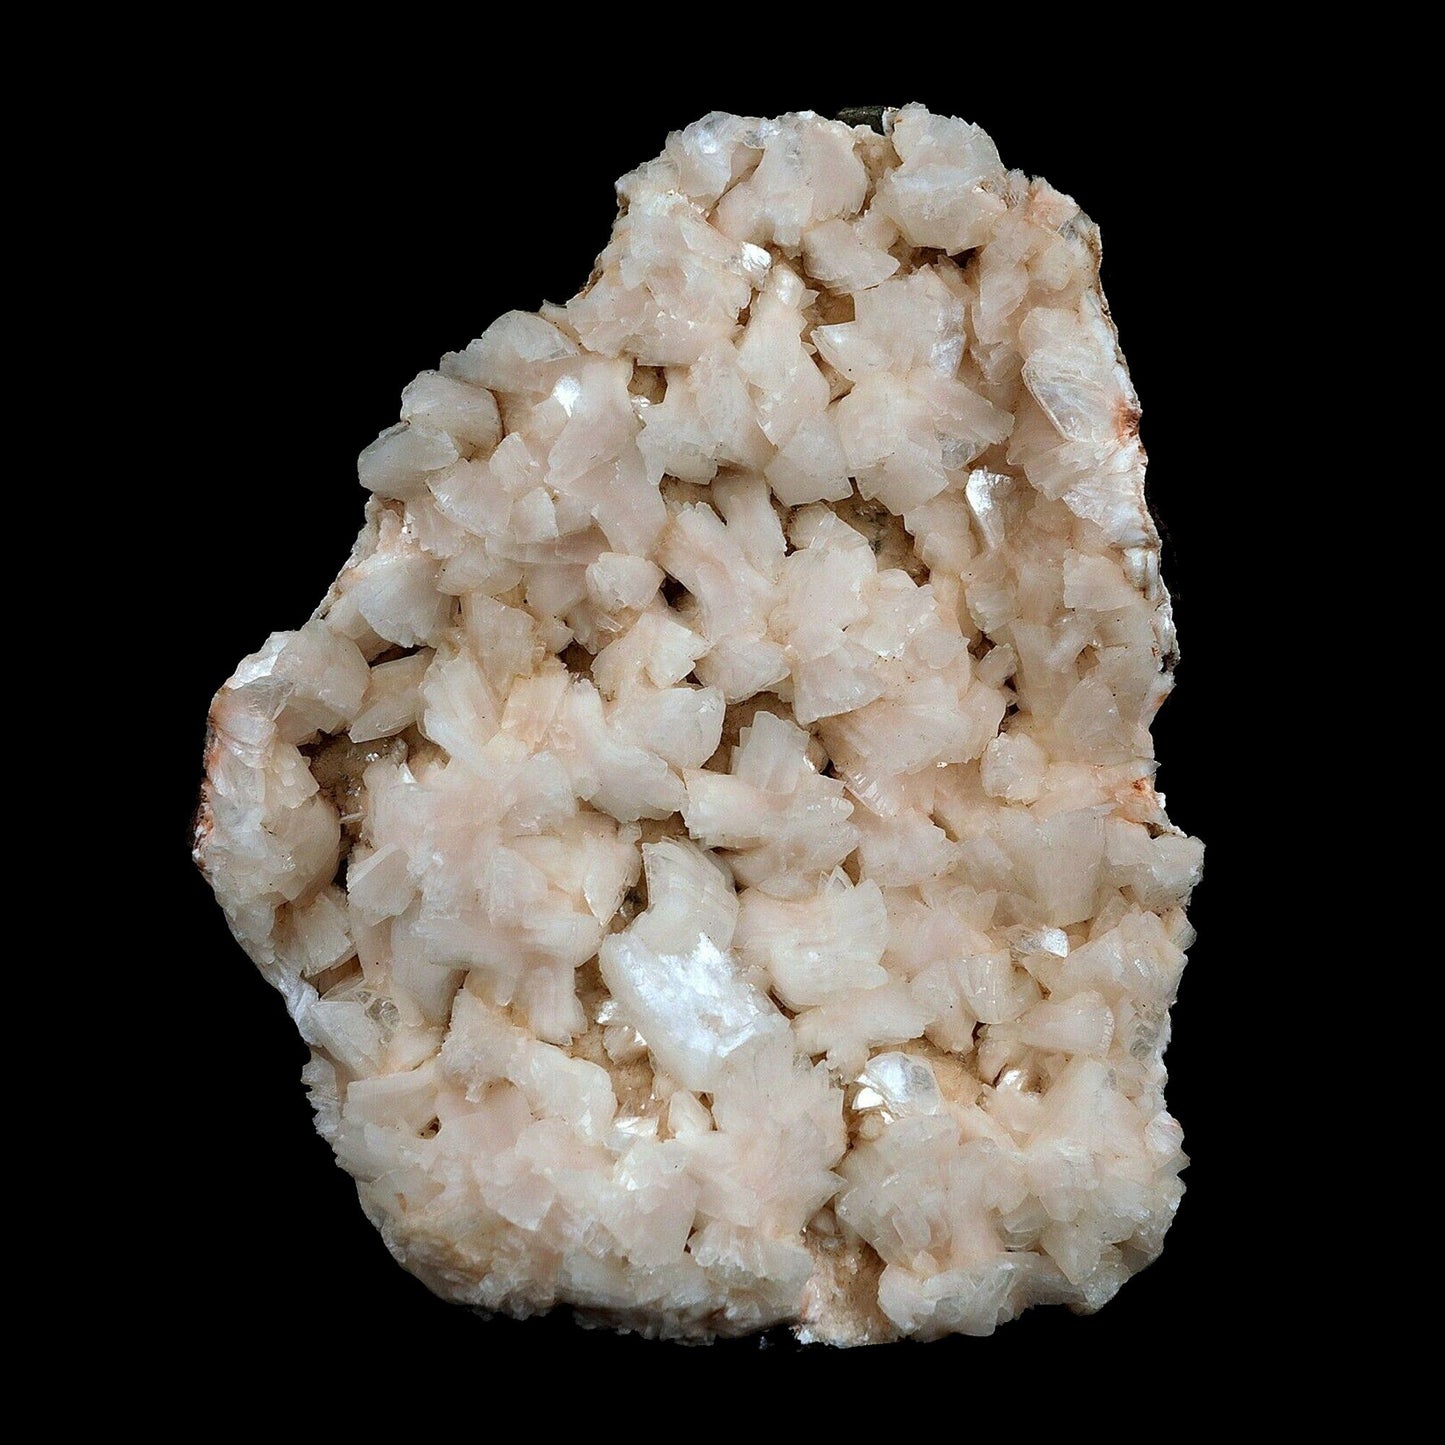 Heulandite cluster Natural Mineral Specimen # B 3665  https://www.superbminerals.us/products/heulandite-cluster-natural-mineral-specimen-b-3665  Features A large aesthetic piece featuring a plate lined with big beige, lustrous Heulandite crystals – this piece sparkles! Great color, luster and contrast – in excellent condition. Primary Mineral(s): HeulanditeSecondary Mineral(s): N/AMatrix: N/A19 cm x 15 cm1530.00 GmsLocality: Nashik, Maharashtra, India